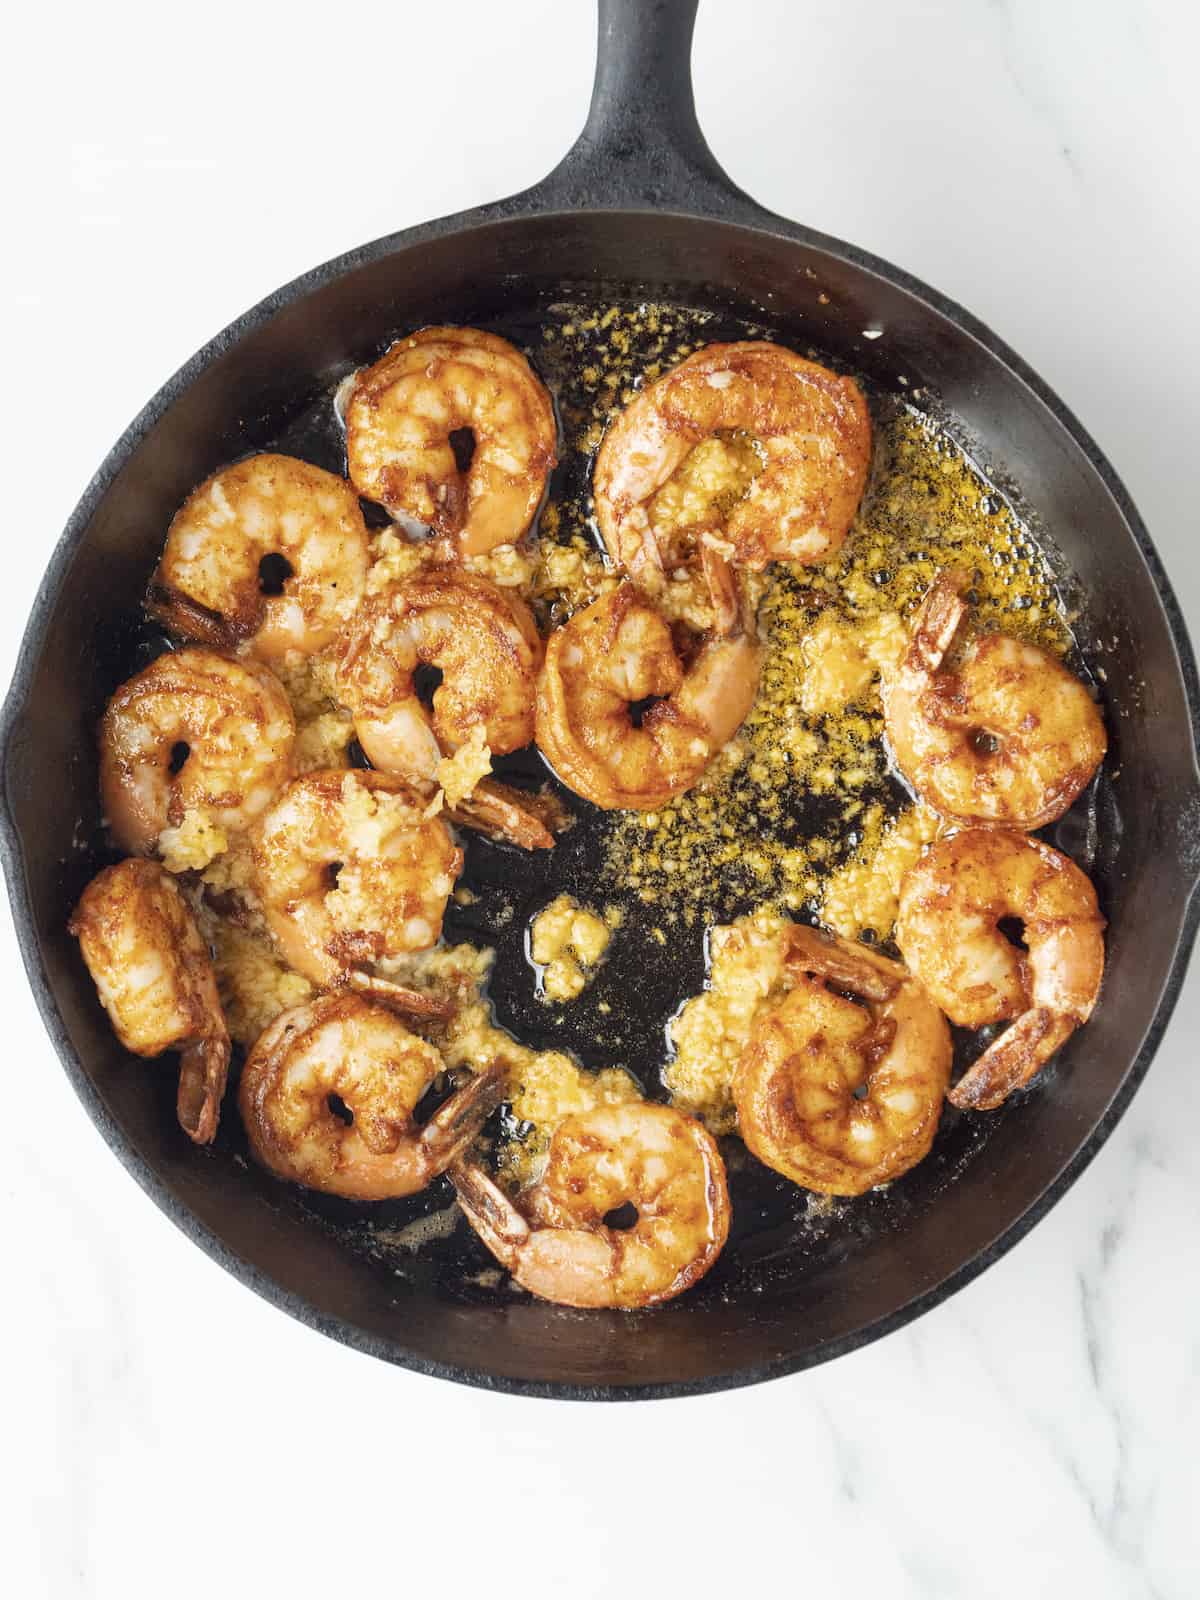 A skillet with Hawaiian garlic shrimp in a chili butter sauce with minced garlic added.